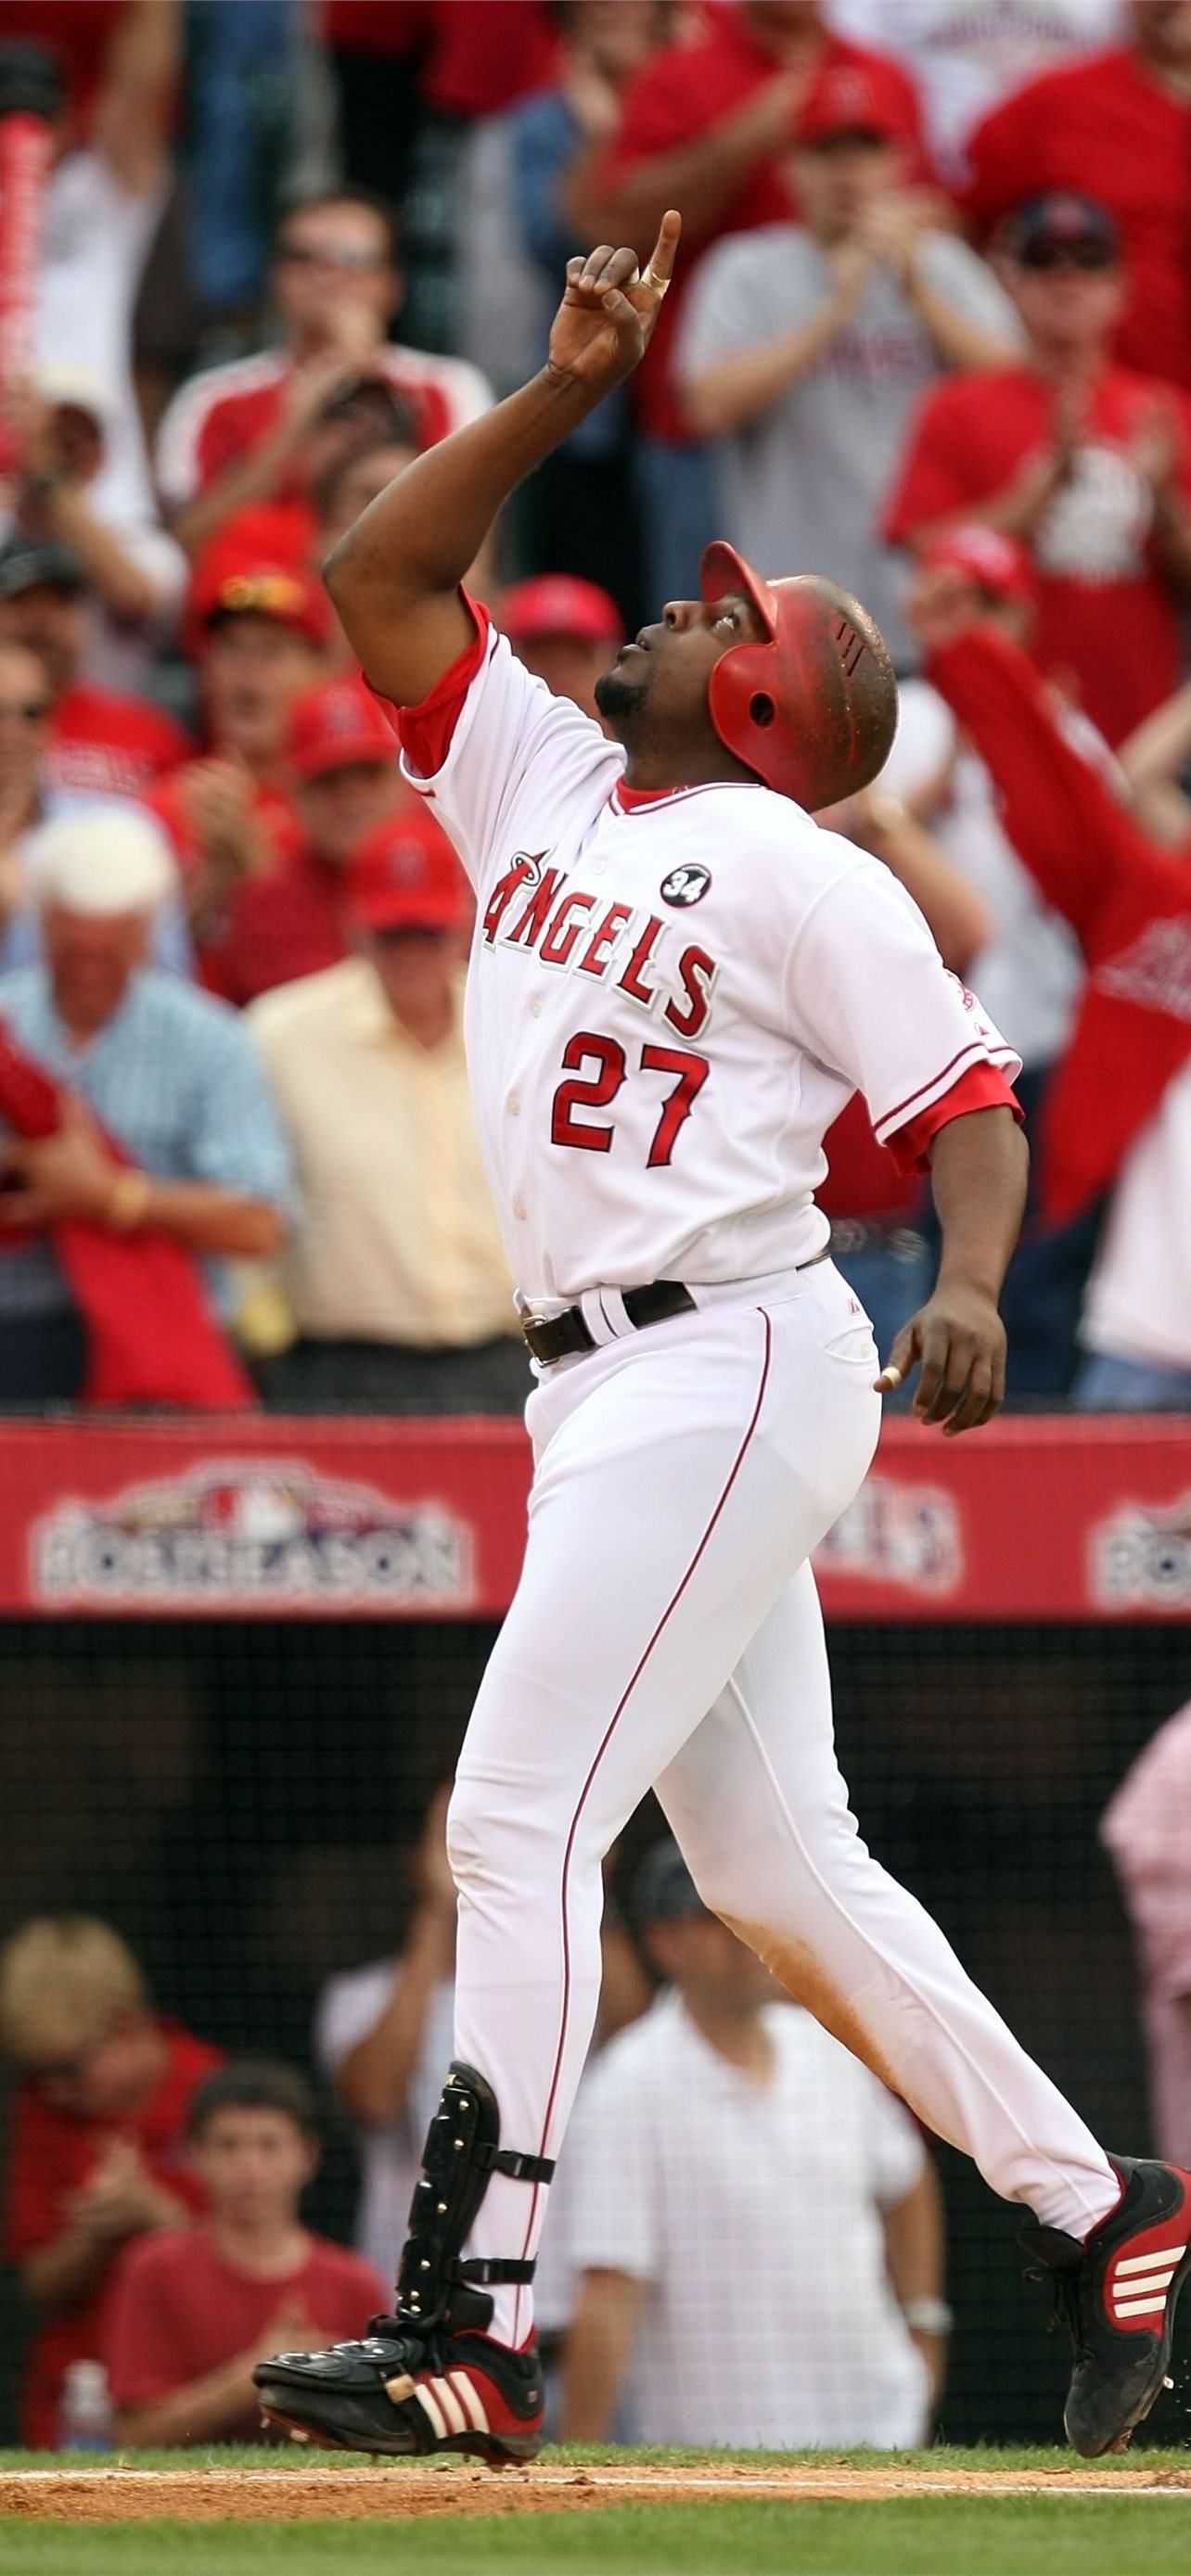 Los Angeles Angels iPhone wallpapers, Free downloads, Team spirit on display, Mobile customization, 1290x2780 HD Phone